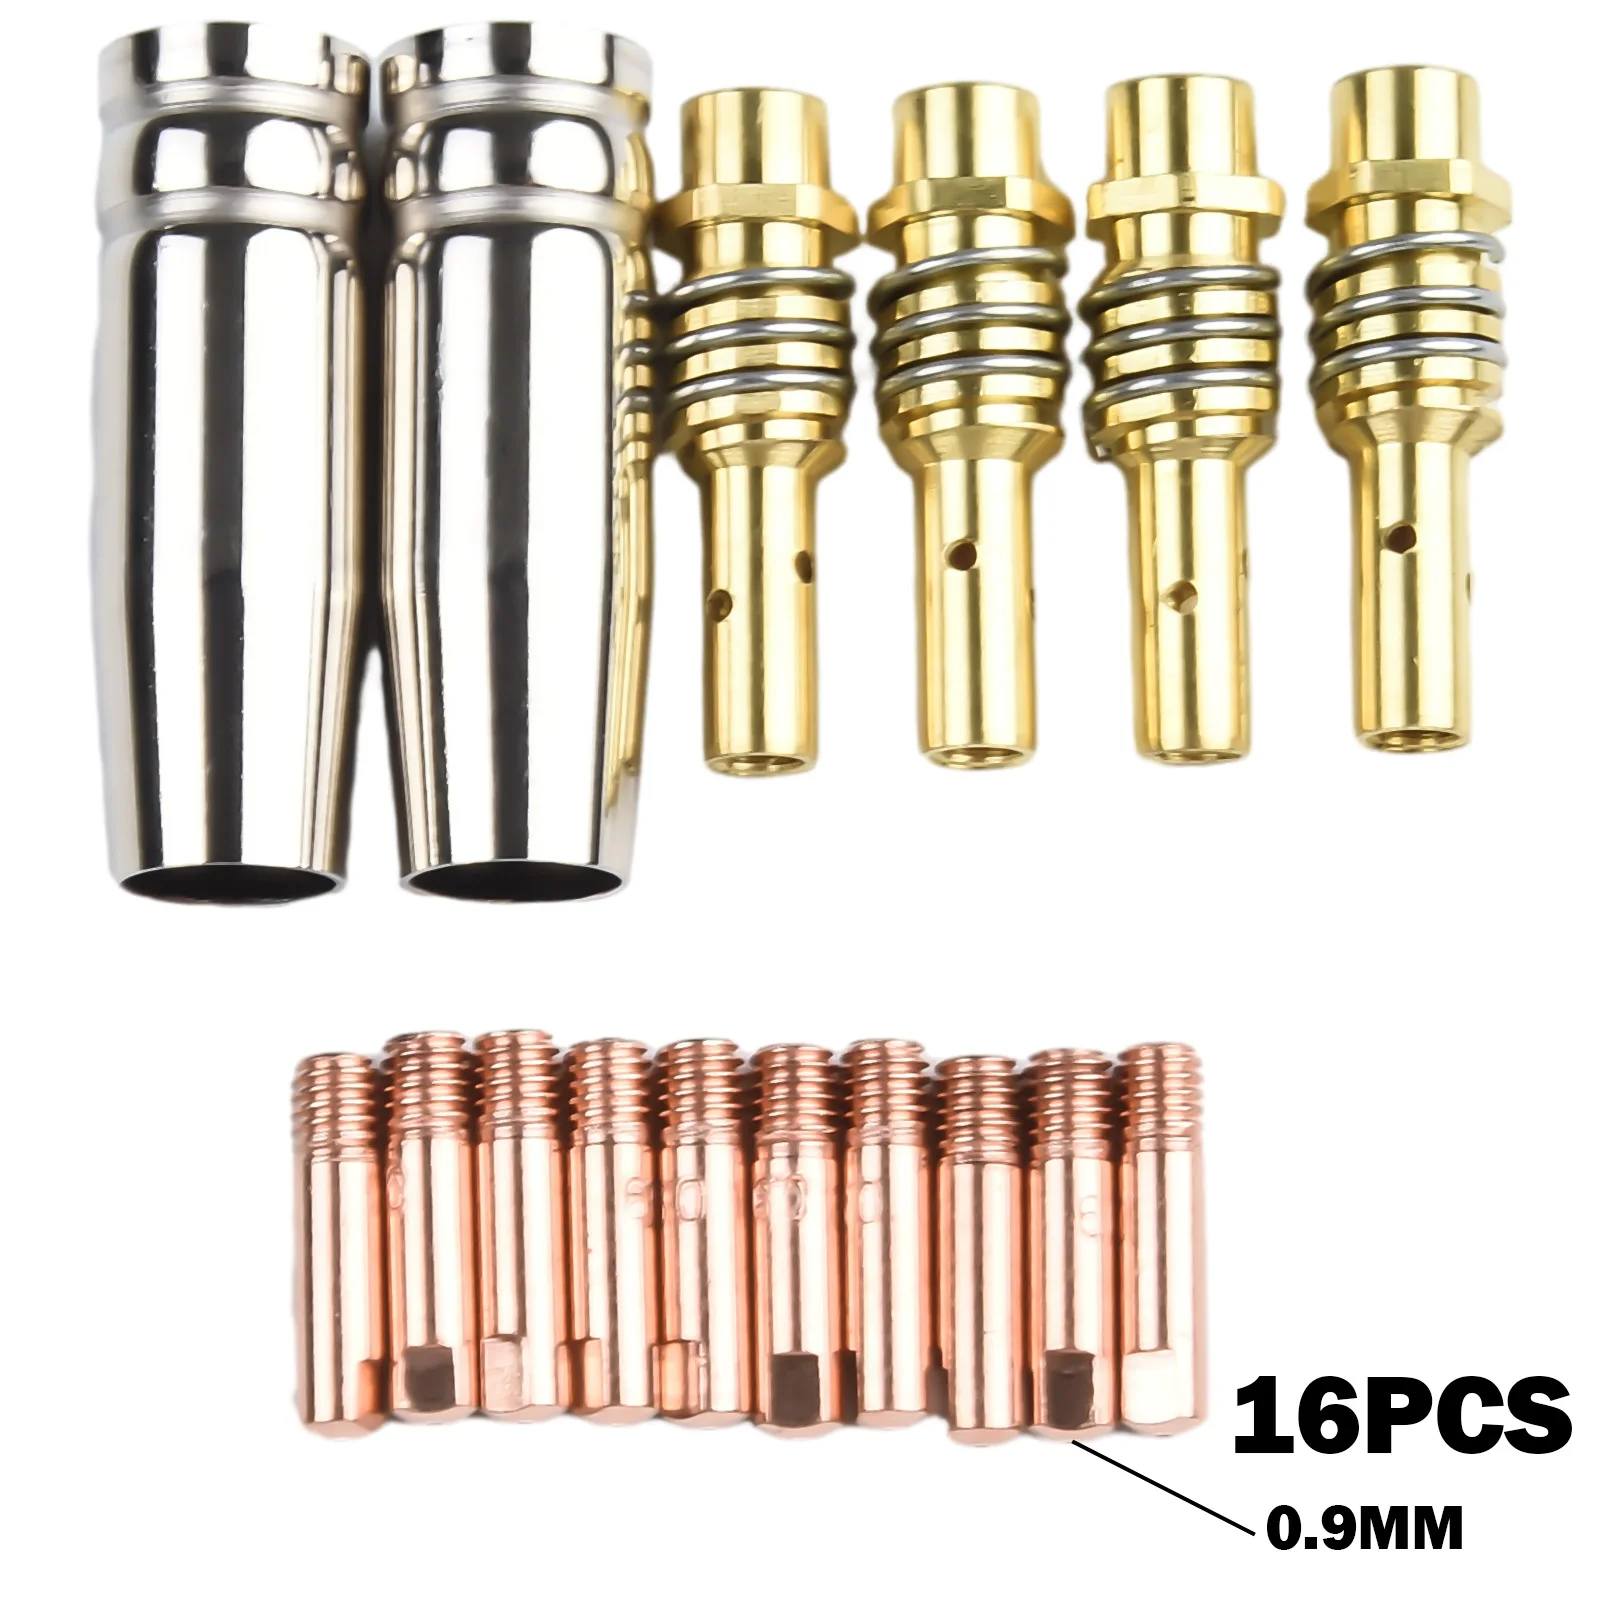 Mig Contact Tip Consumables 16PC MIG Welding MB15 15AK Contact Tip 0.8/1.0/1.2mm Conductive Tips Protective Nozzles Tip Holder brand new welding nozzle consumables kit tip holder accessories conductive tip contact tip mig welding spare parts